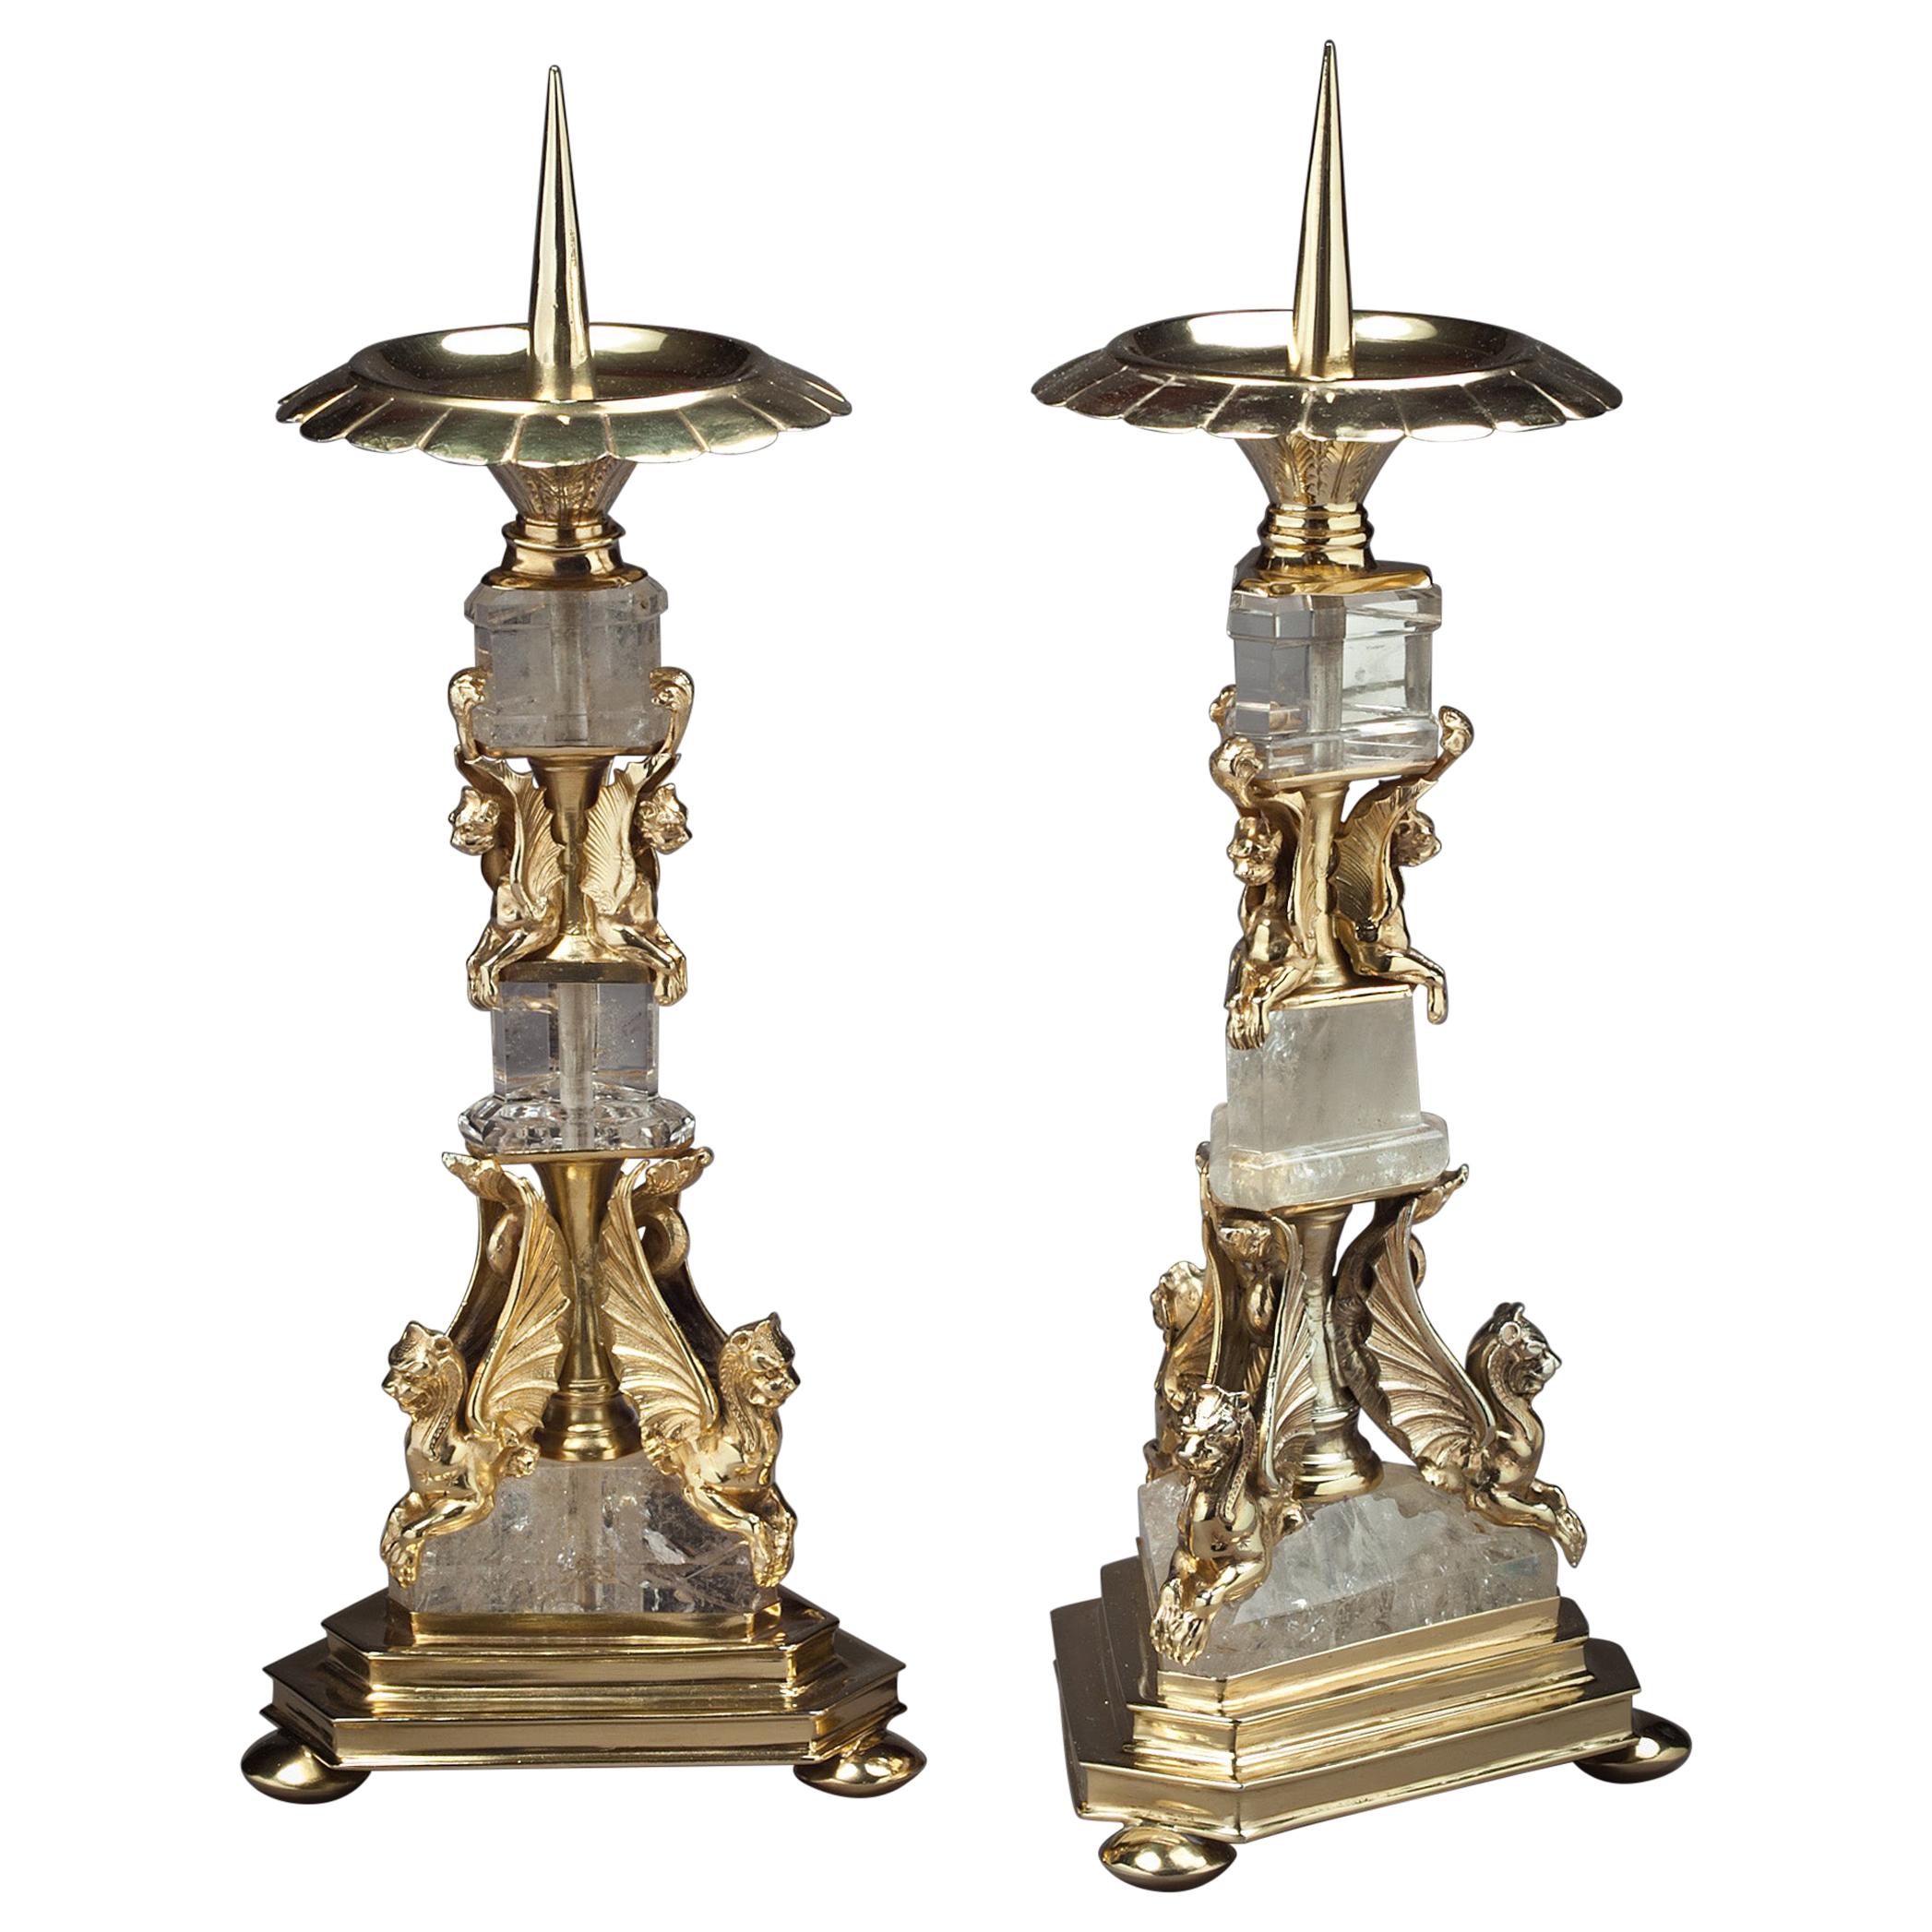 Pair of Silver and Rock Crystal Pricket Candlesticks, Continental, circa 1840